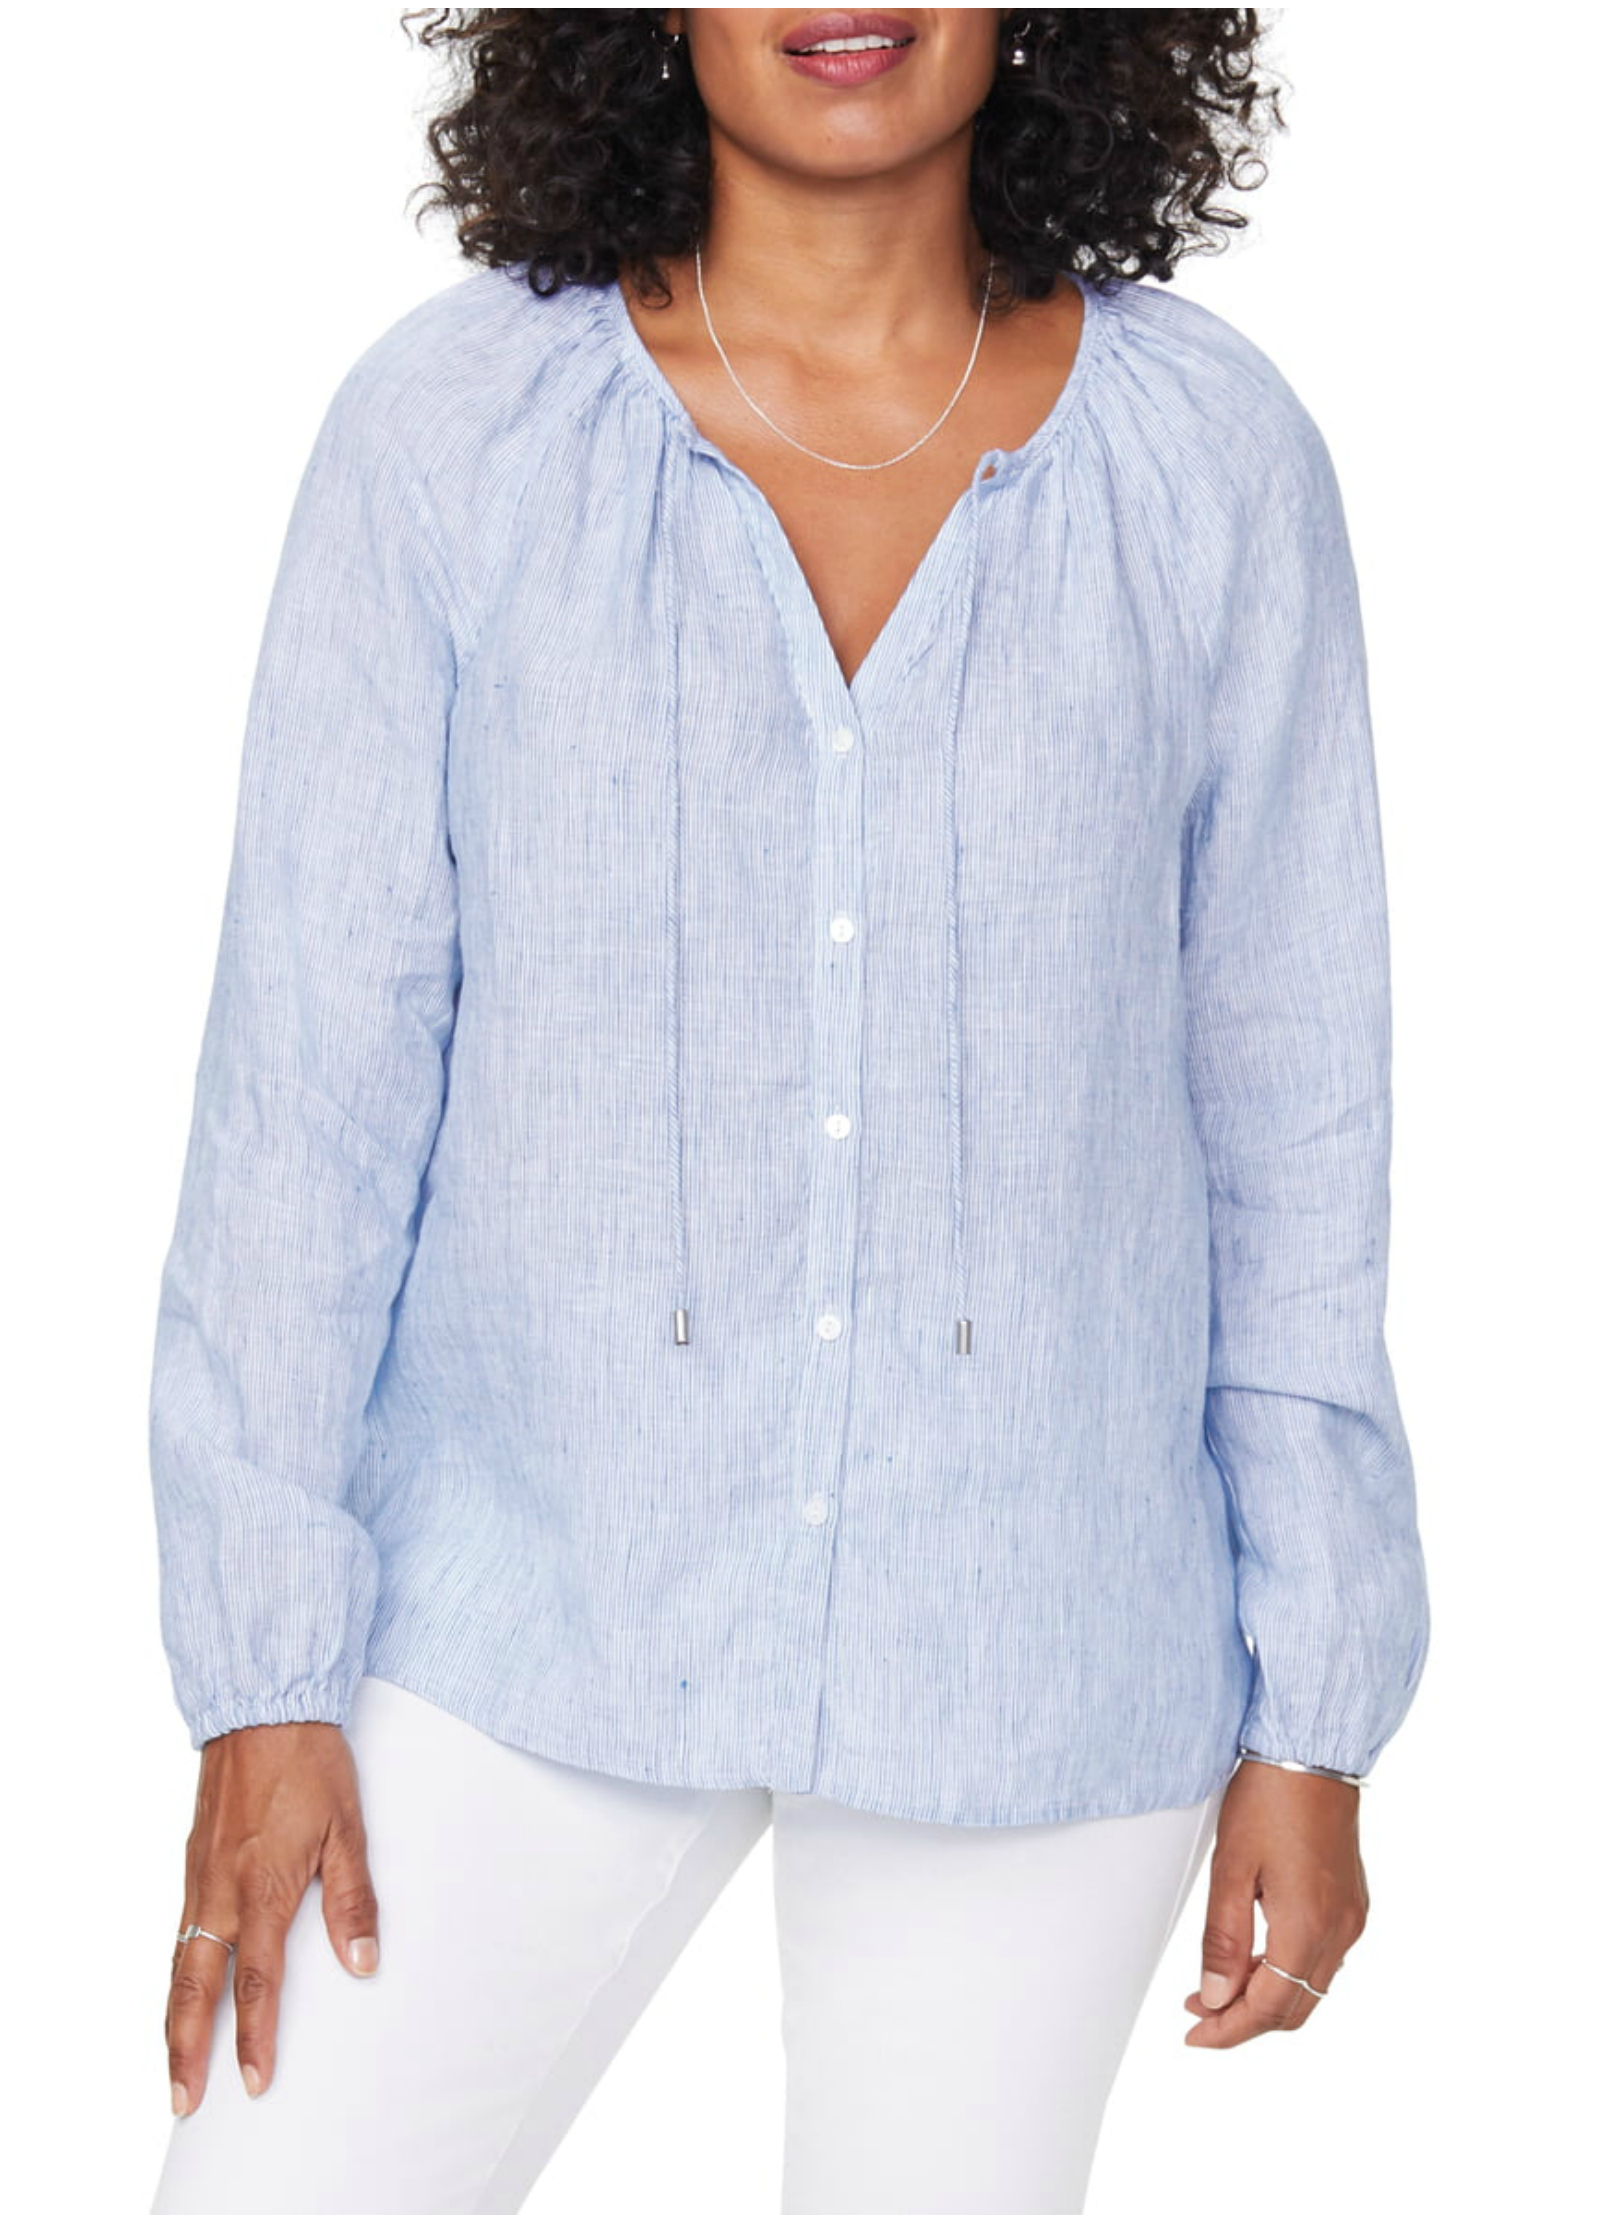 Womens Cotton Linen Tops and Long Sleeve Blouses Plus Size Button Down Shirts Loose V Neck Tees